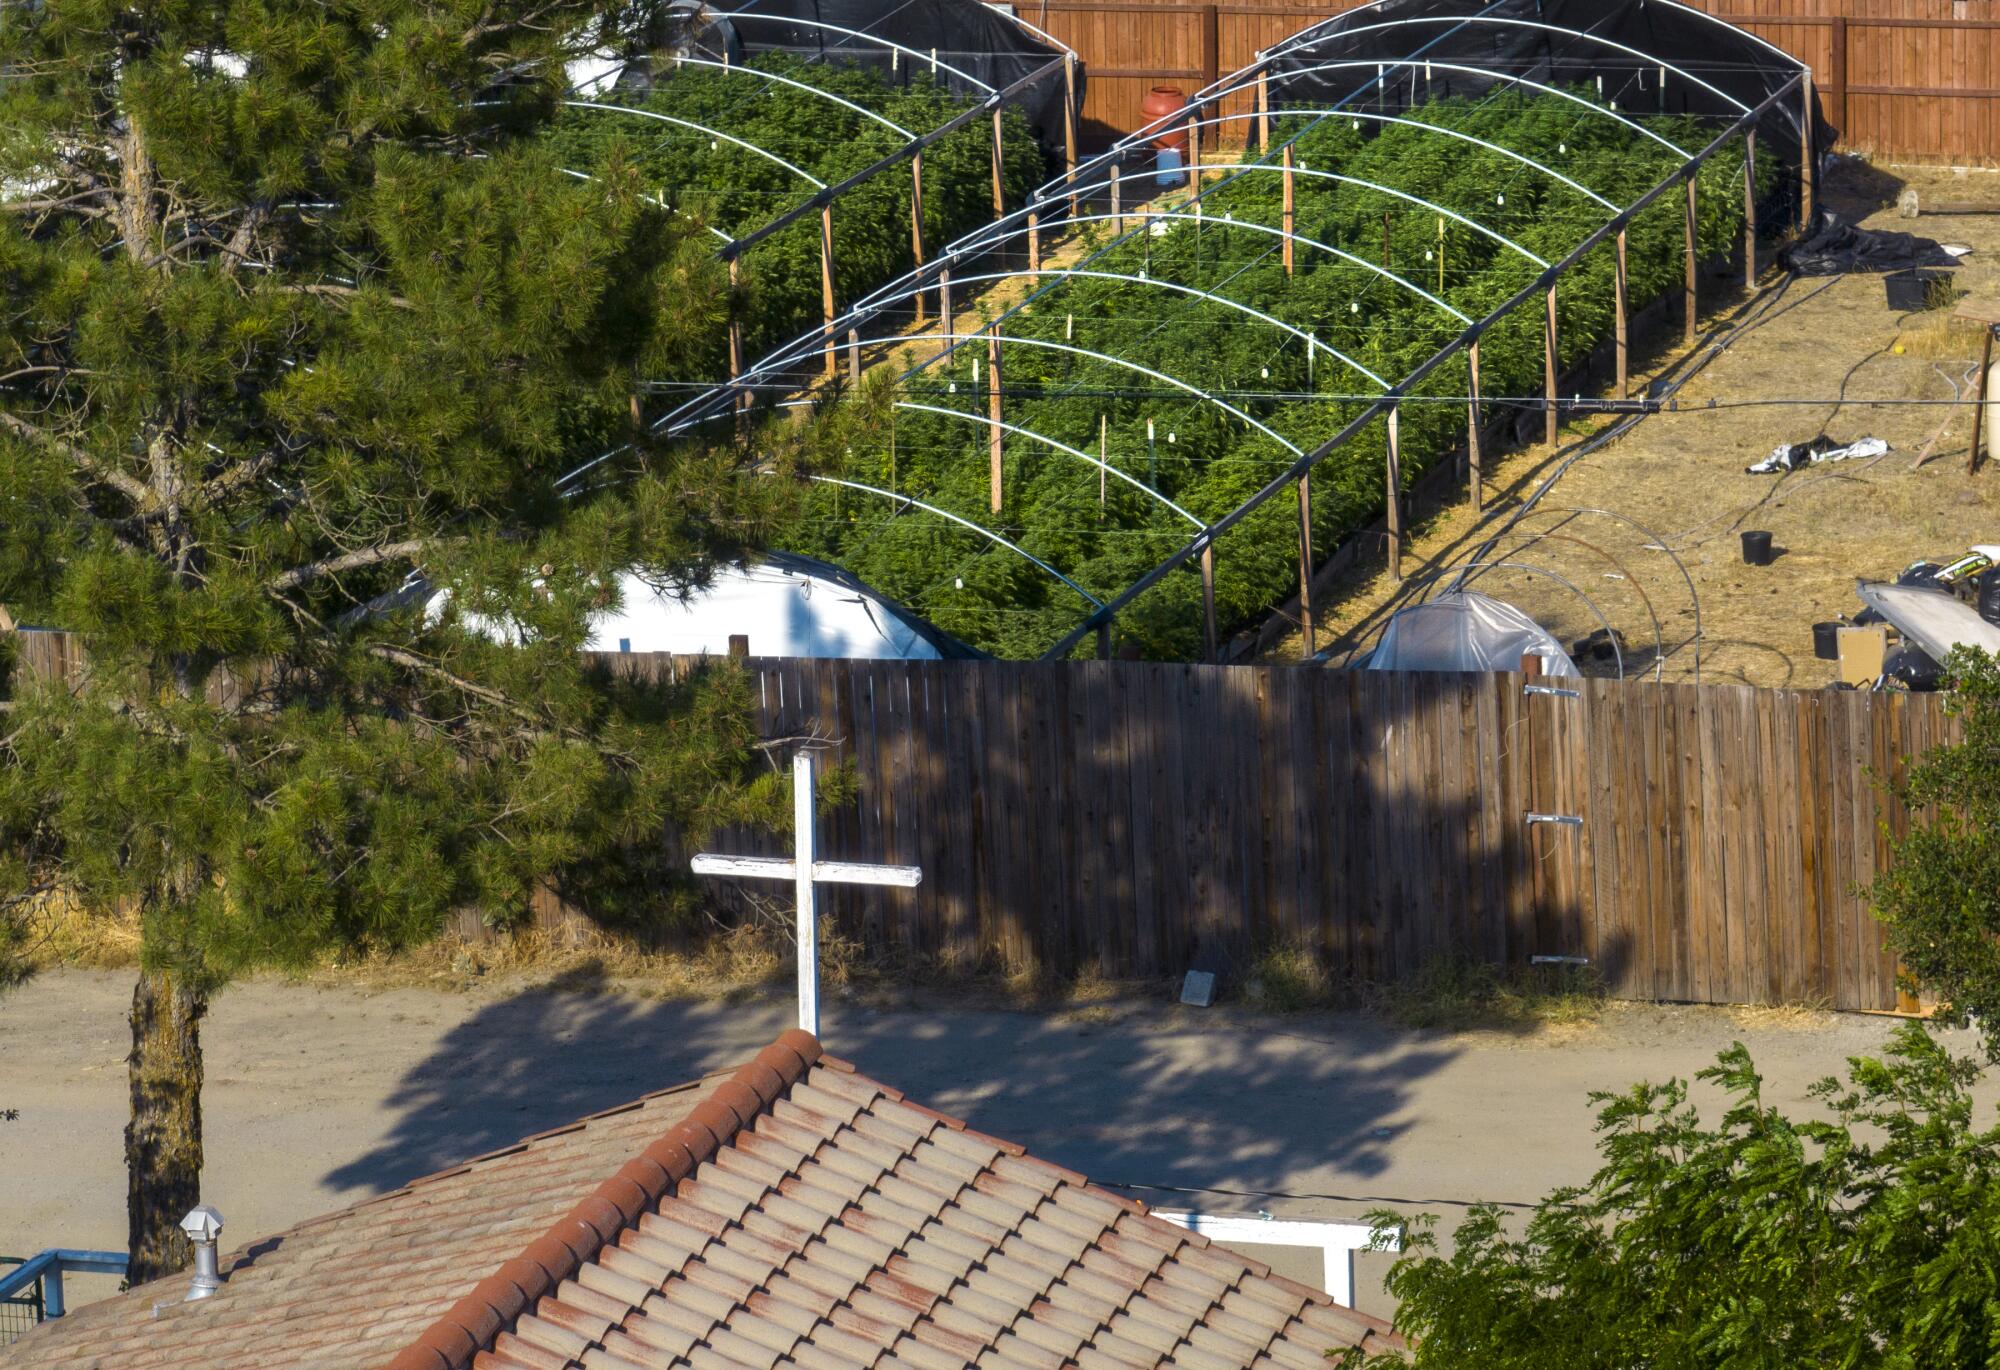 Cannabis hoop houses fill the backyard of a home adjacent to the Our Lady Queen of Peace Roman Catholic Chapel in Covelo.